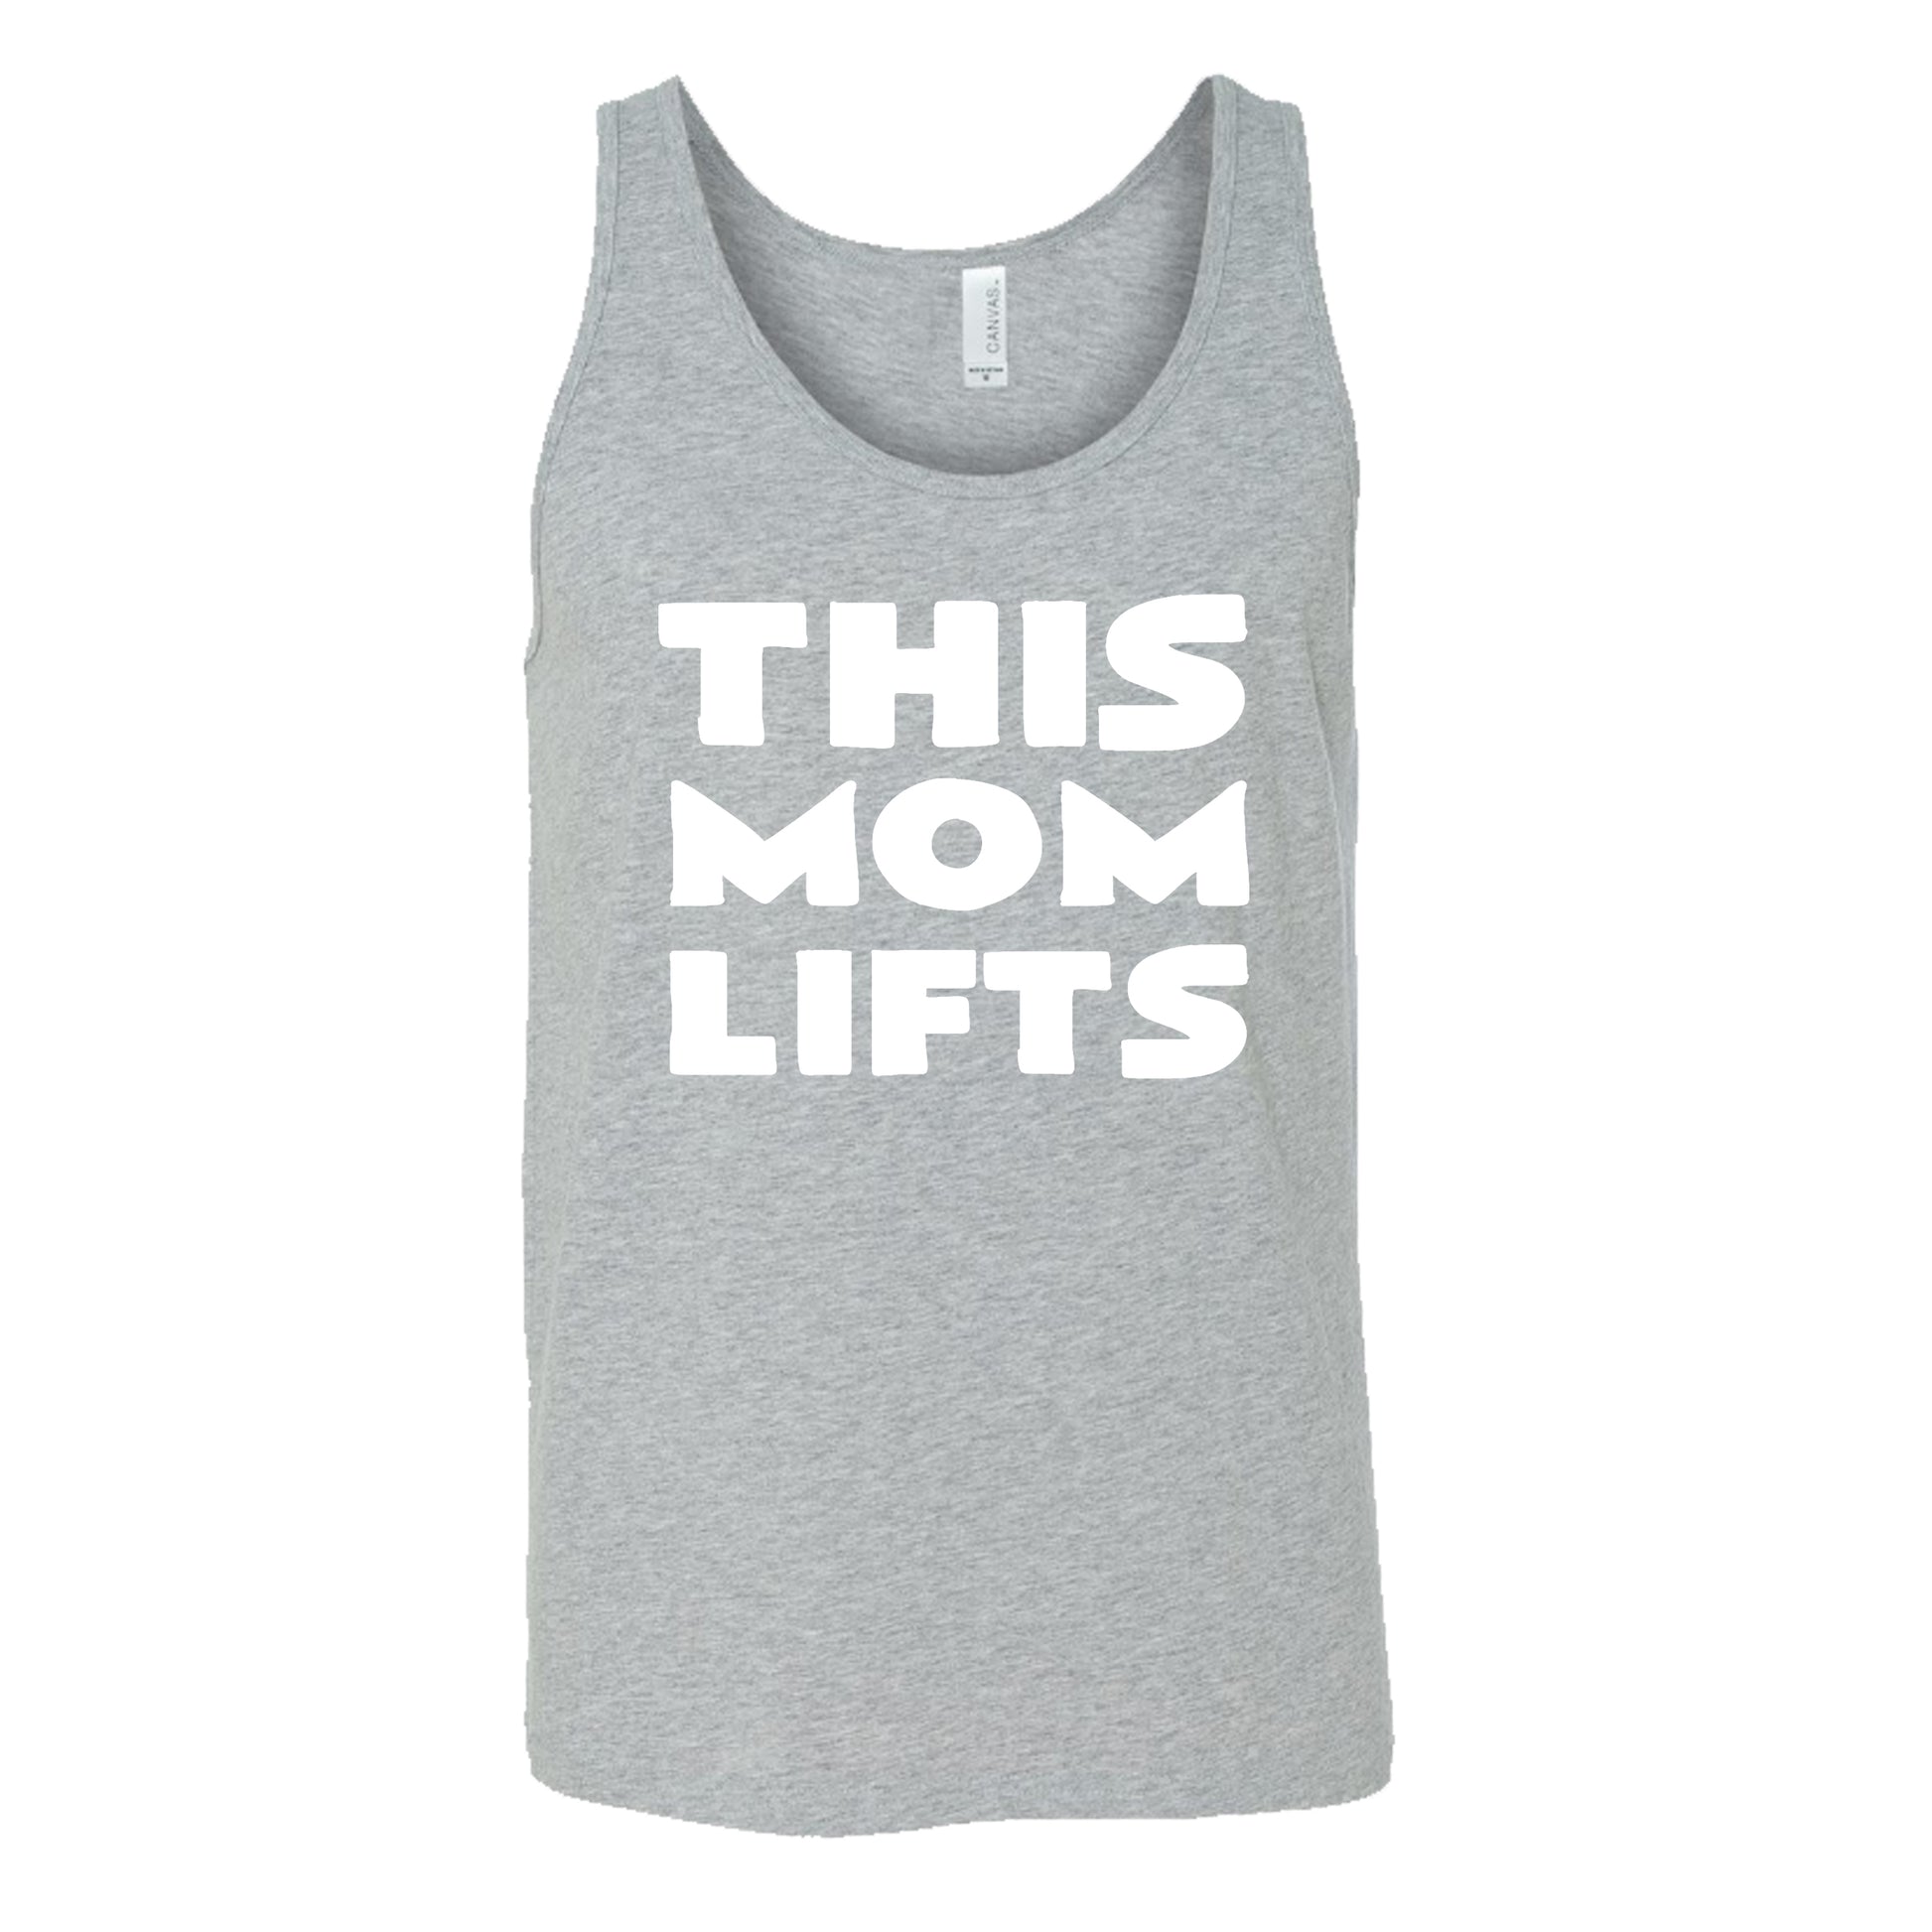 grey unisex tank with the saying "this mom lifts" in the center in white lettering